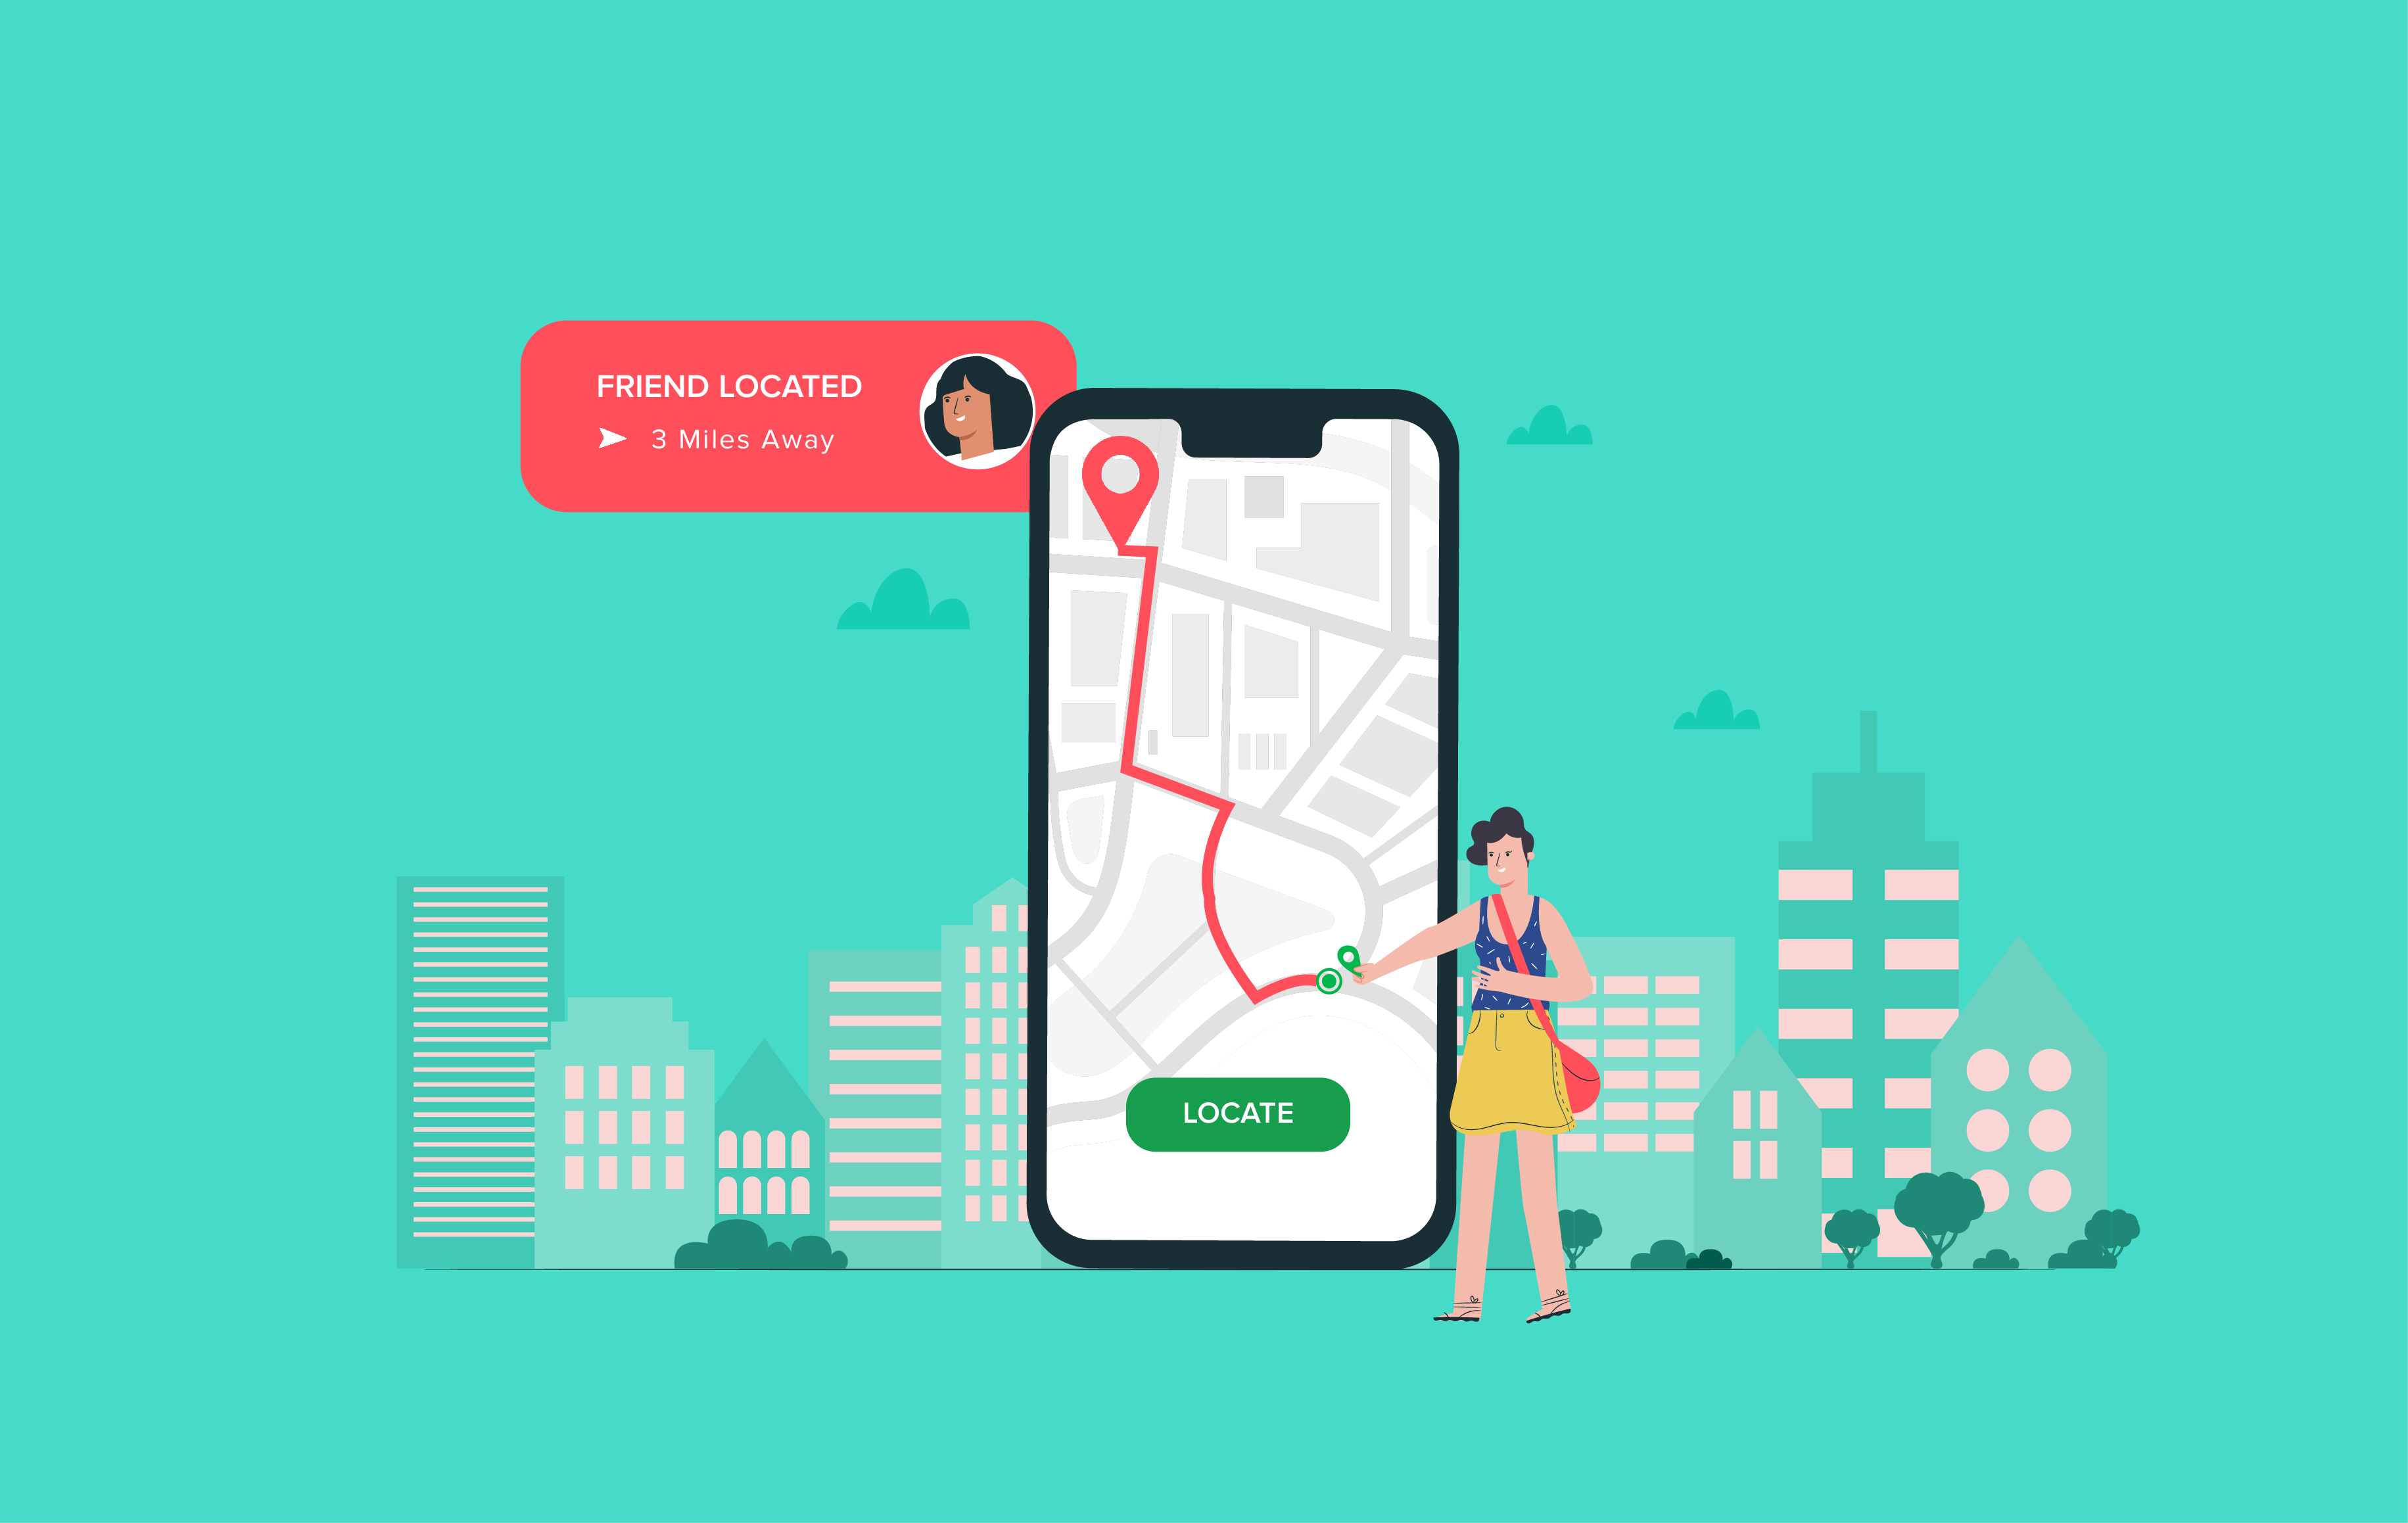 Best Location Tracking Apps